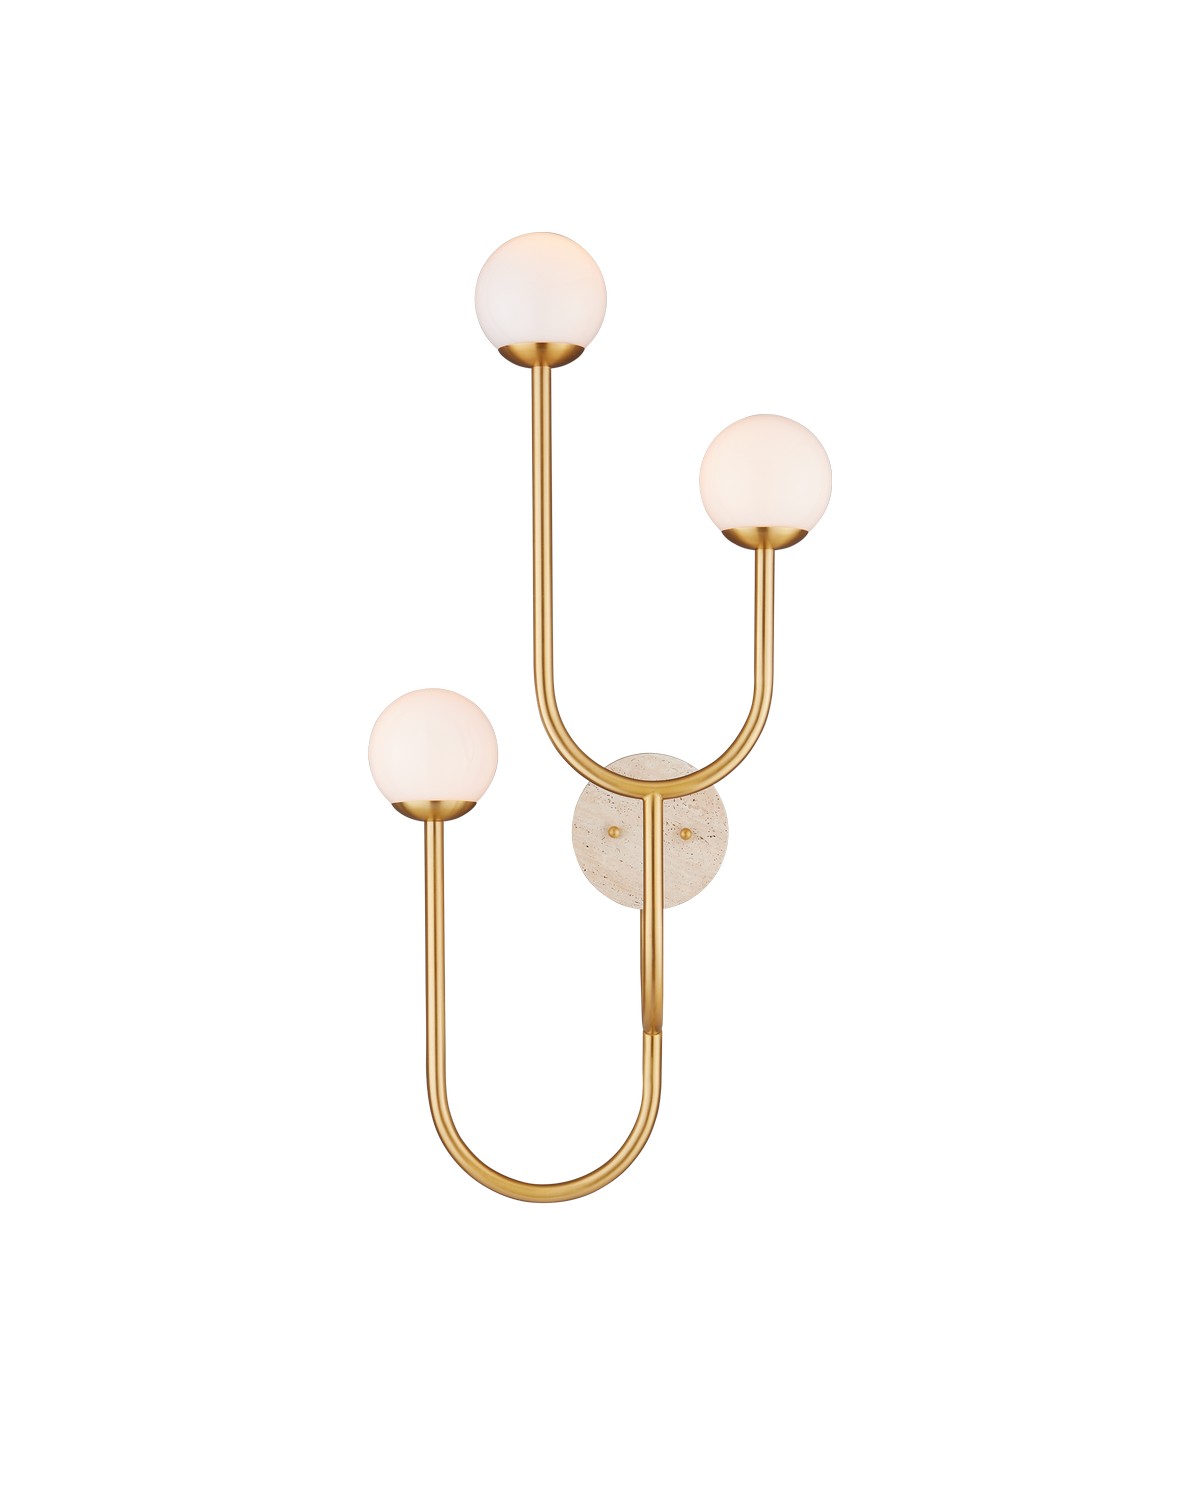 Currey and Company - 5000-0256 - Three Light Wall Sconce - Brass/Natural/White